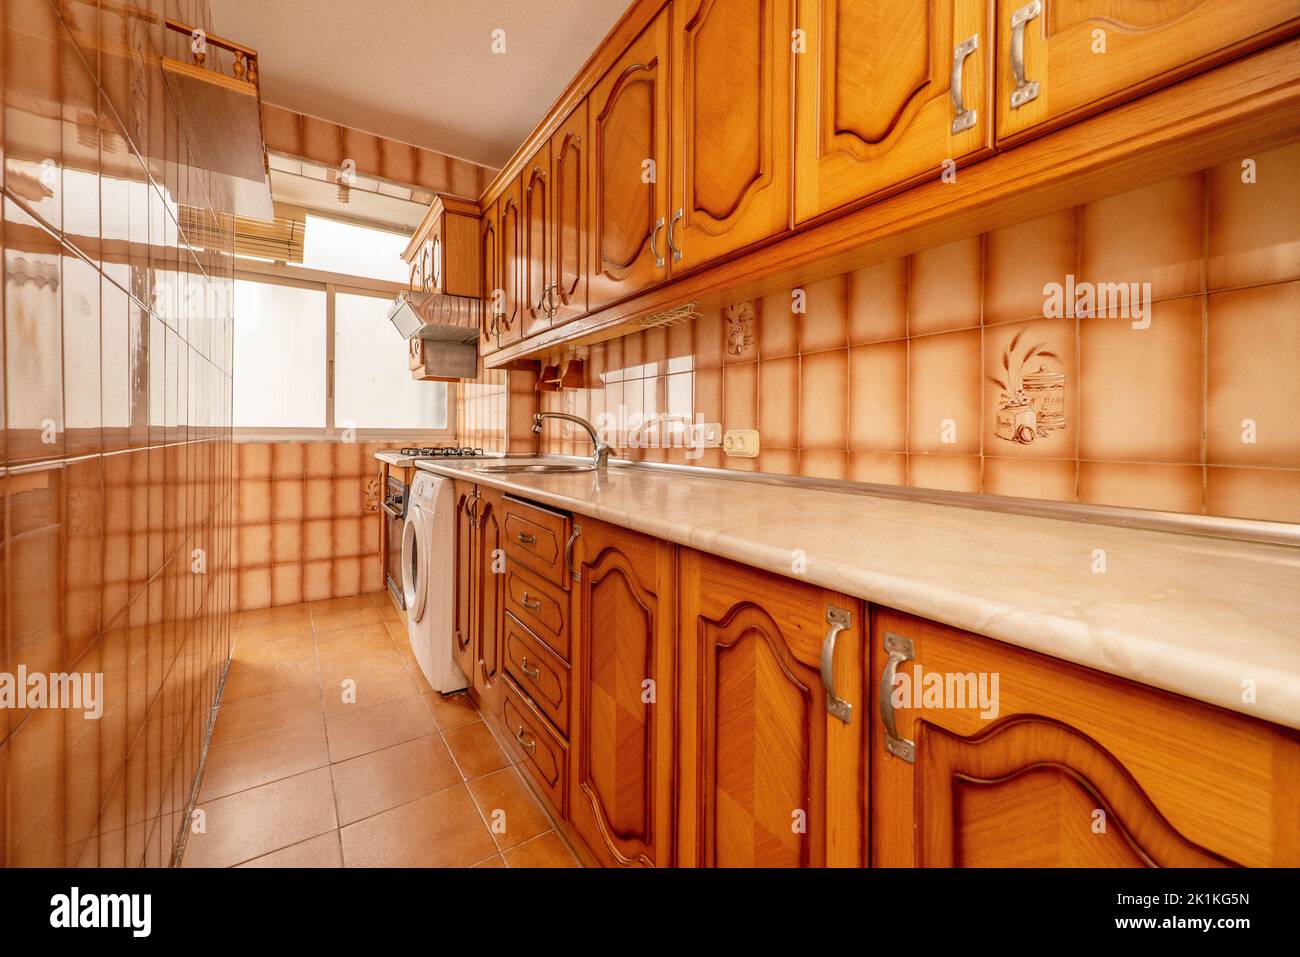 https://c8.alamy.com/comp/2K1KG5N/long-kitchen-with-cream-marble-look-wood-countertops-and-orange-brown-tiles-with-rustic-wood-cabinets-rear-window-and-built-in-appliances-2K1KG5N.jpg